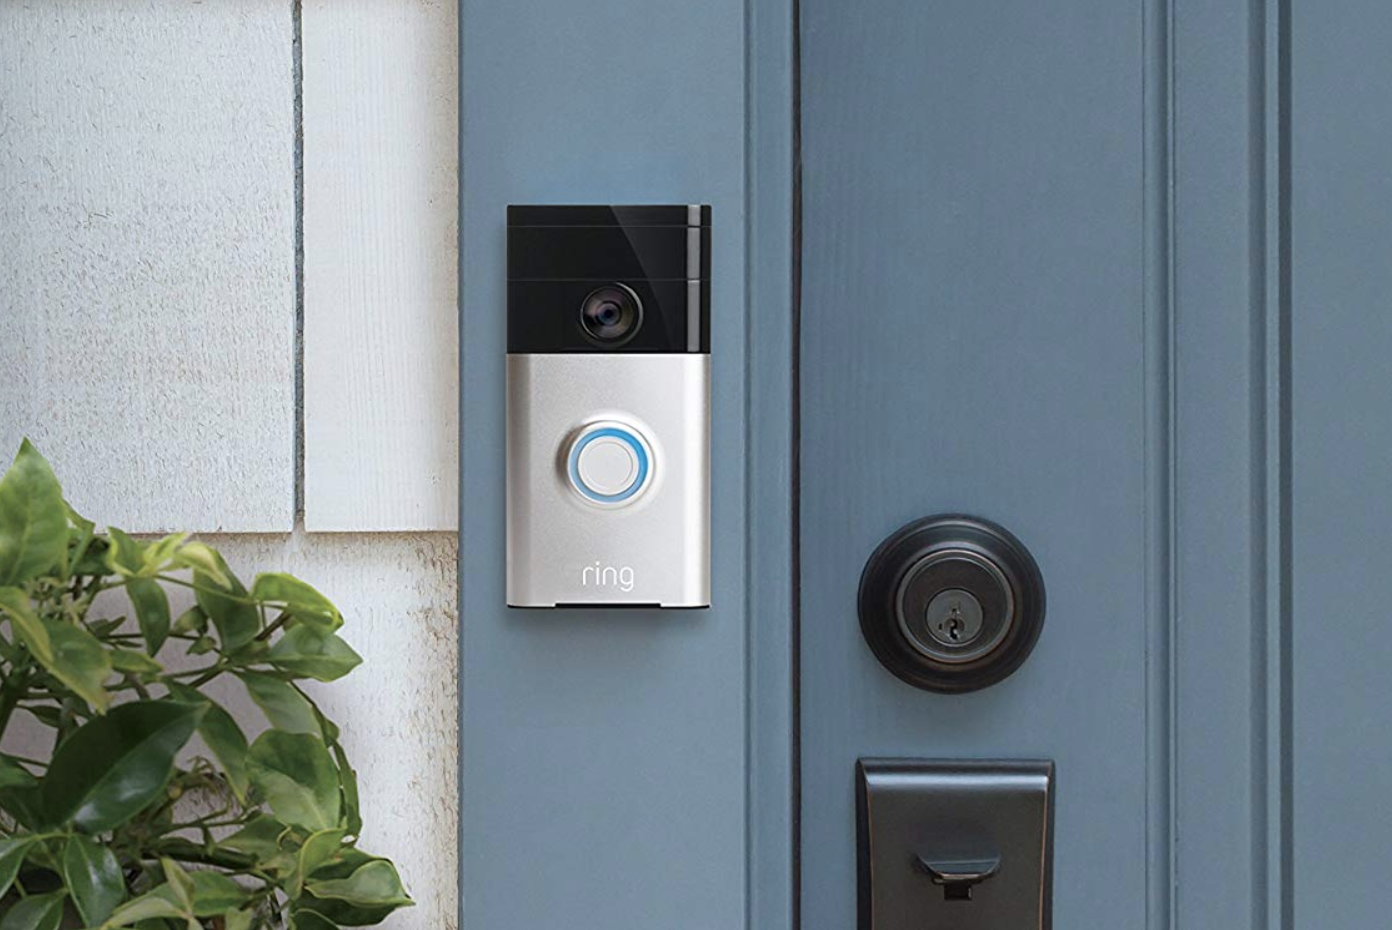 Ring Wi-Fi Enabled Video Doorbell in Satin Nickel - $69.99 (Down From $99.99)